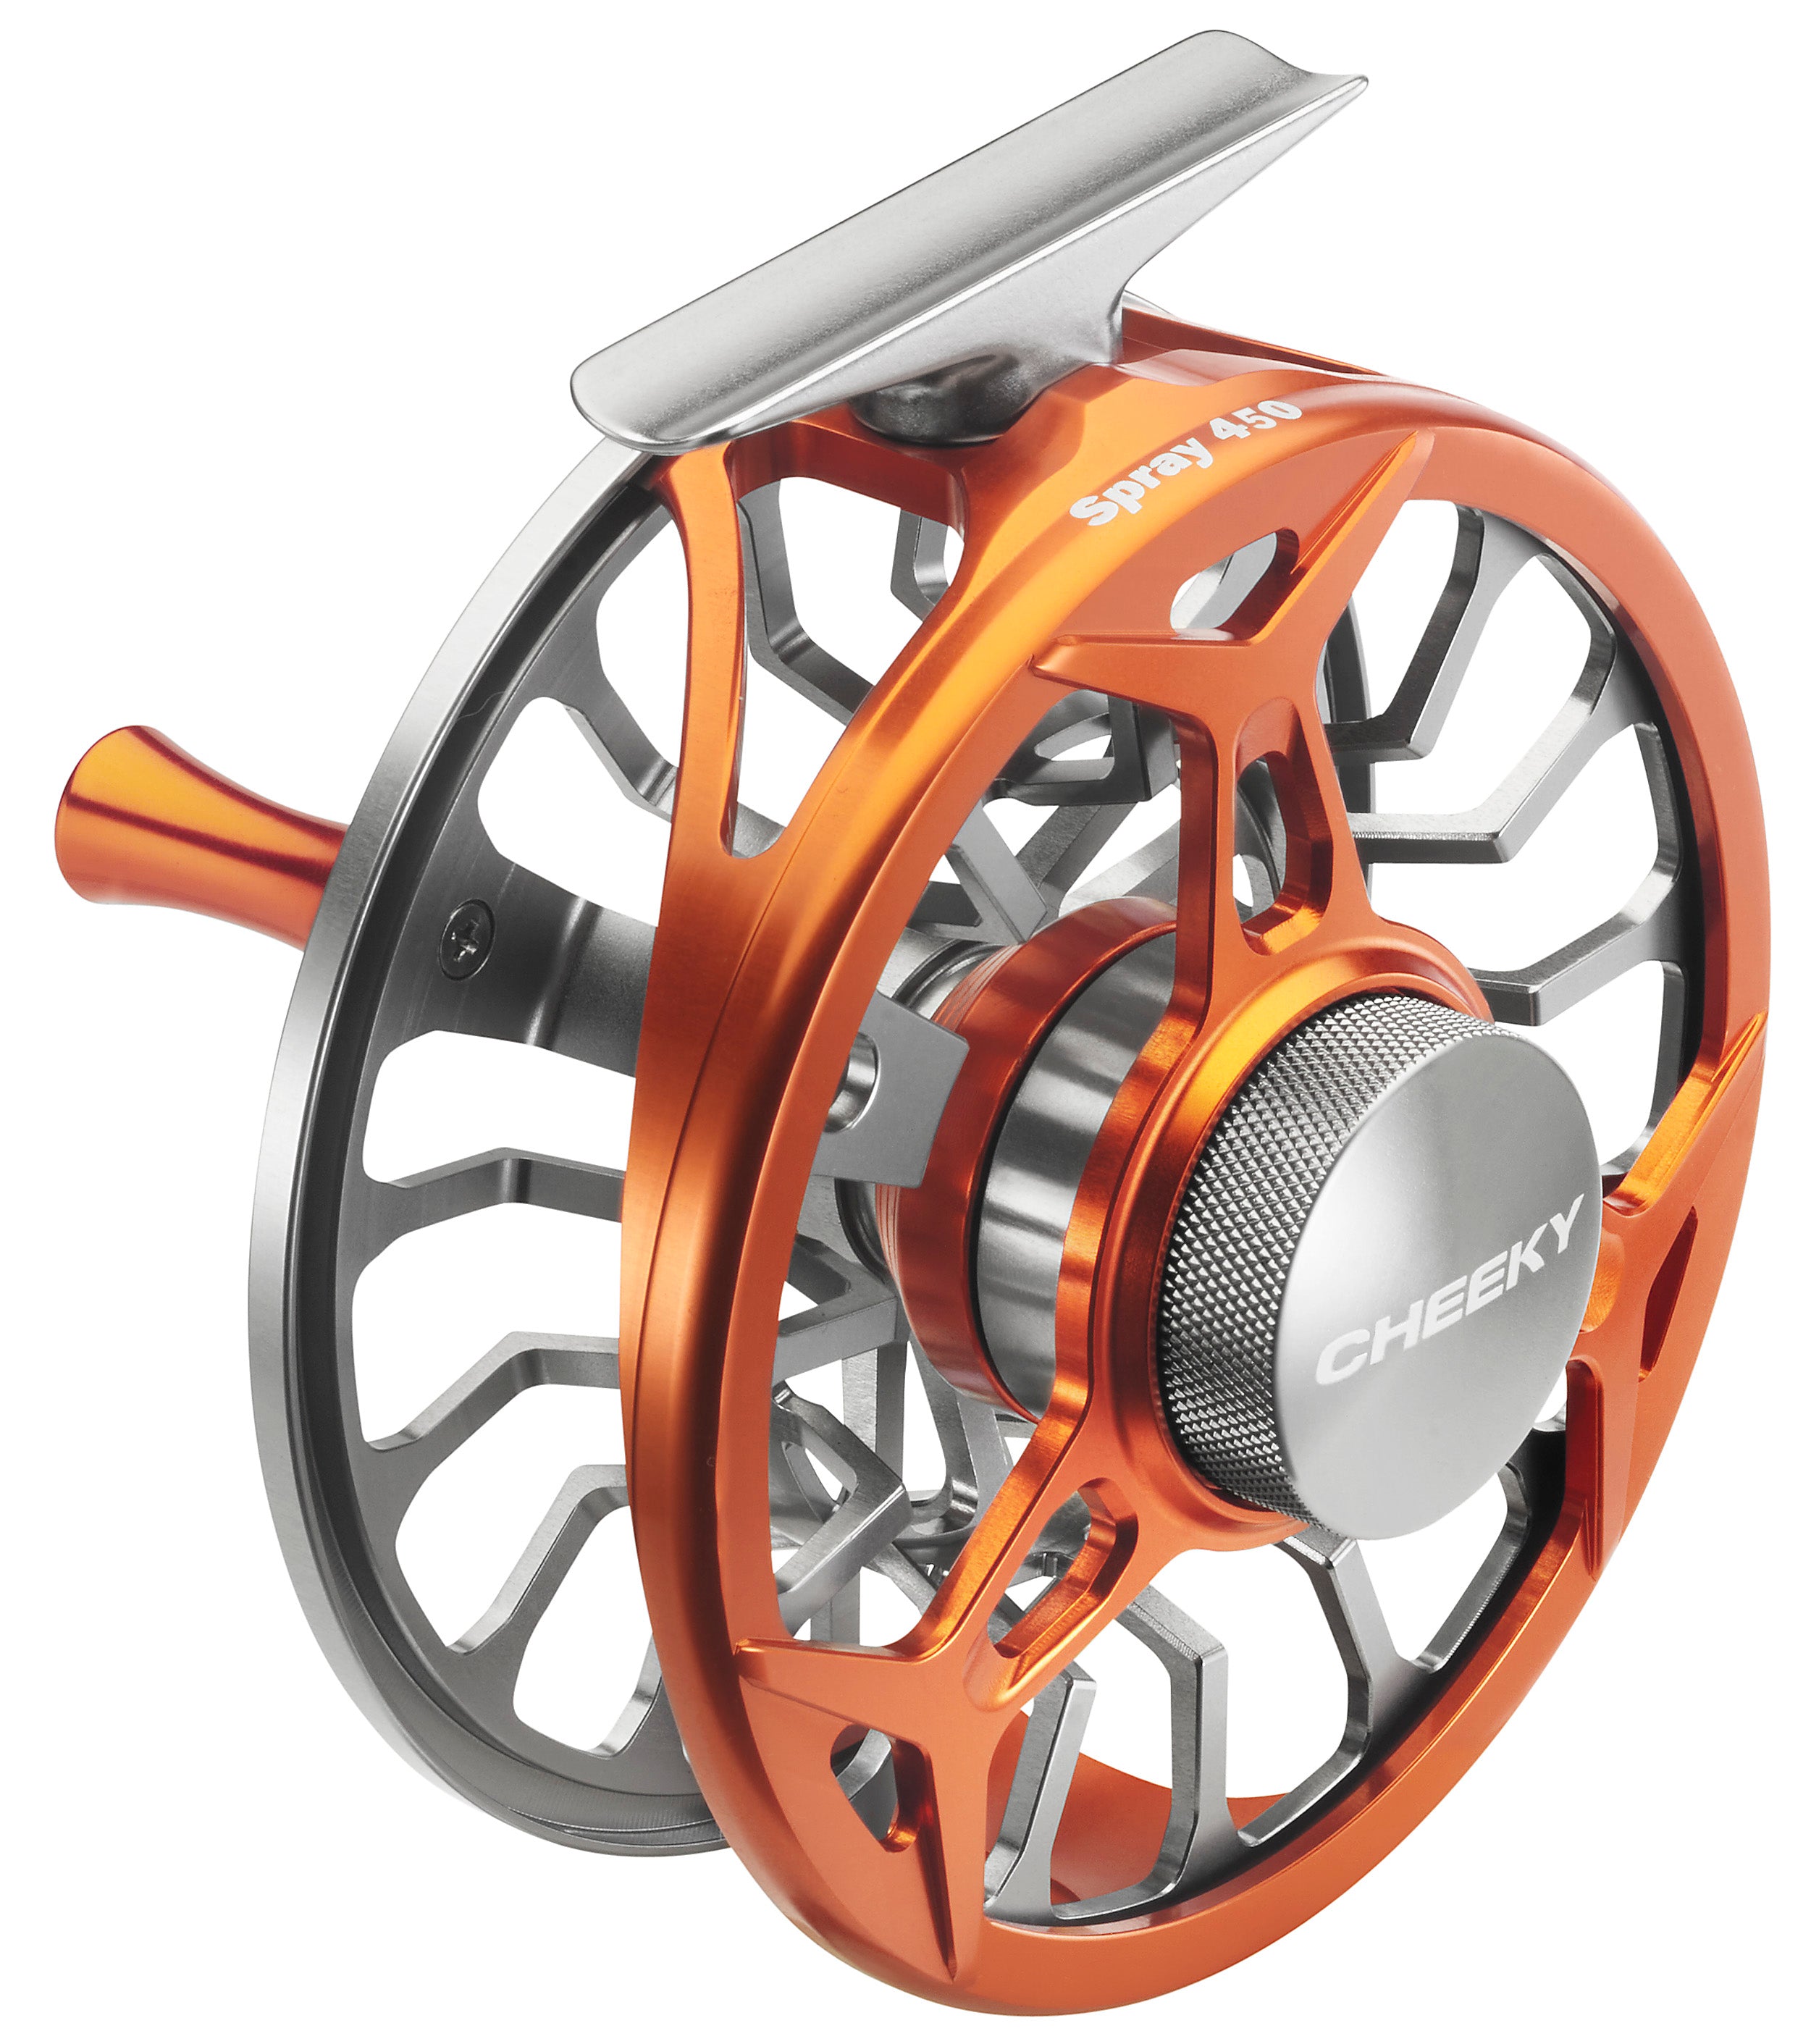 Shop Saltwater Reels: the New Cheeky Spray 450 Fly Reel